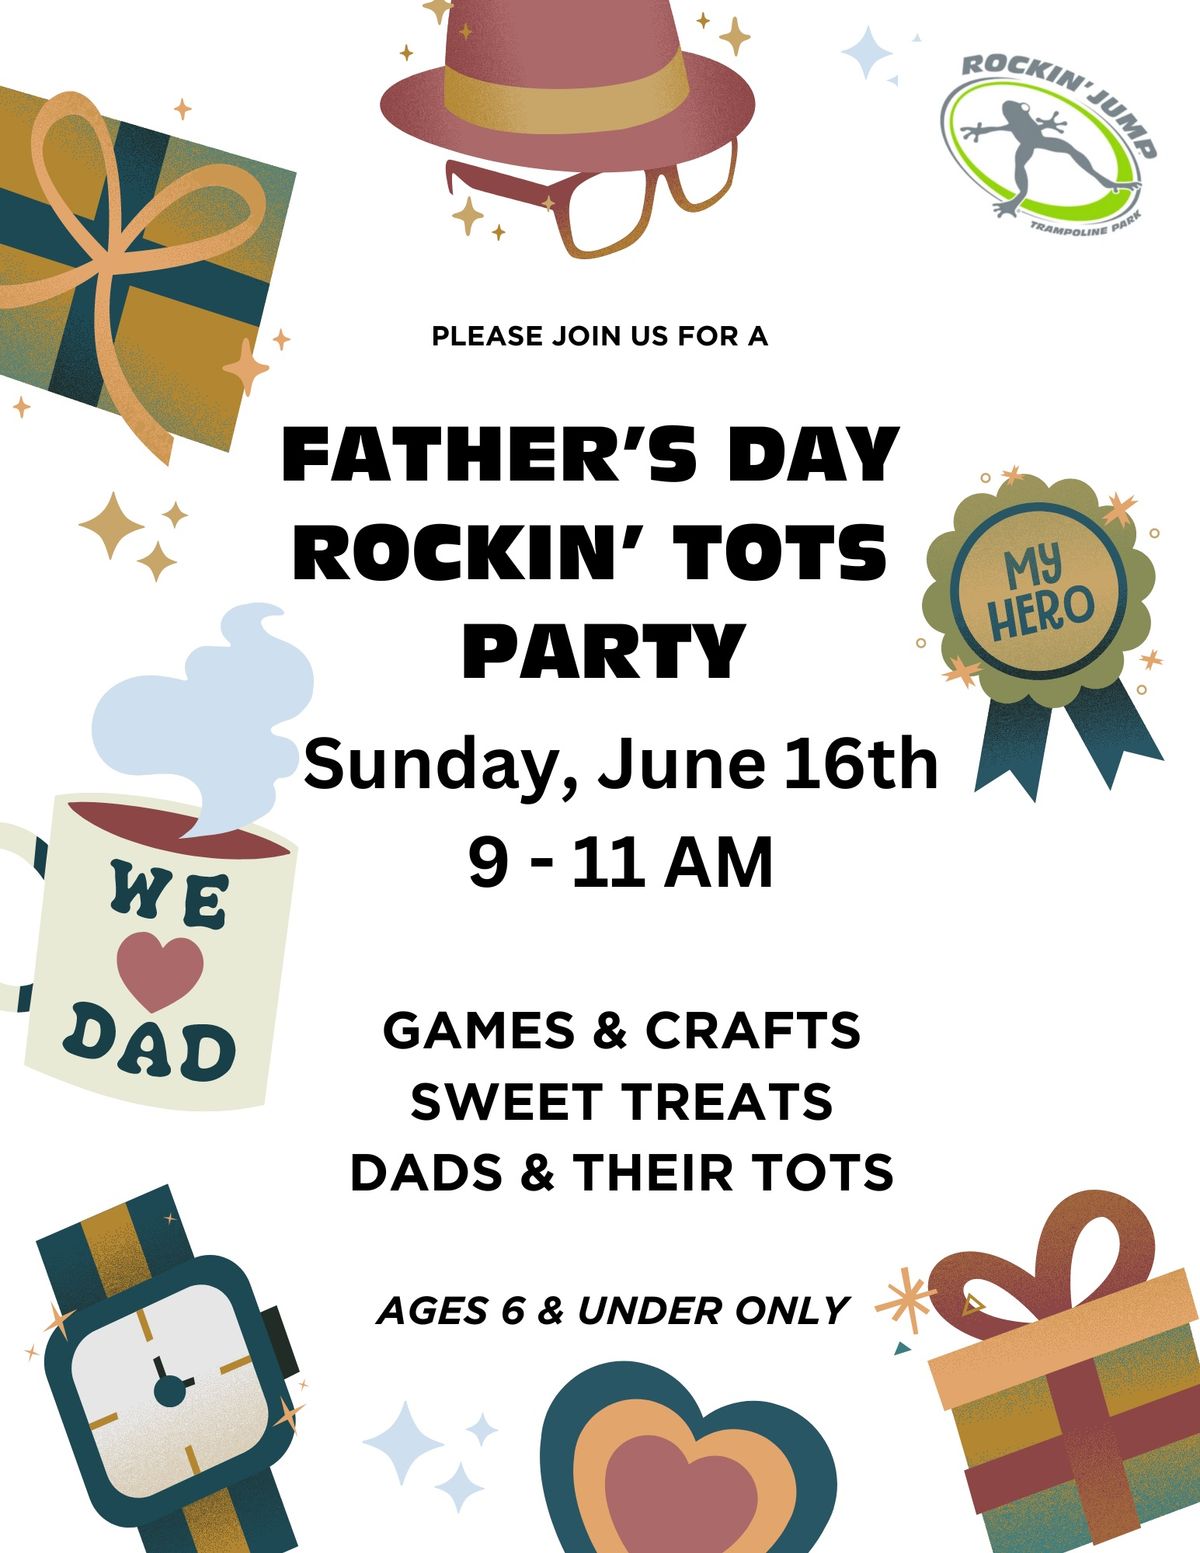 Father's Day Rockin' Tots Party